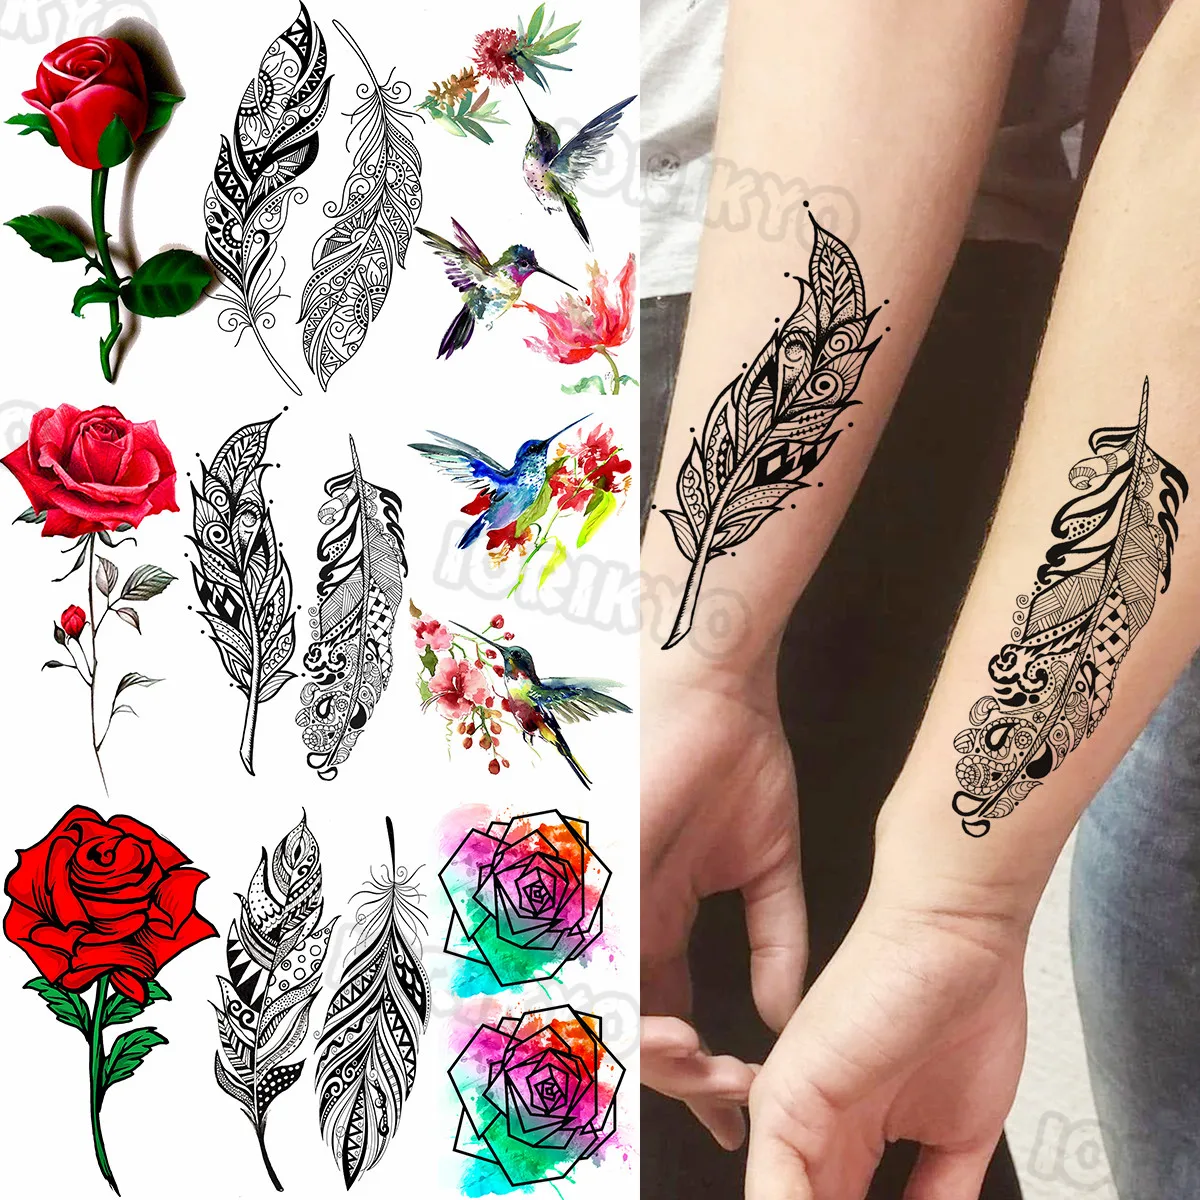 

Feather Small Temporary Tattoos For Women Girls Realistic Watercolor Hummingbird Rose Flower Fake Tattoo Sticker Arm Body Tatoos